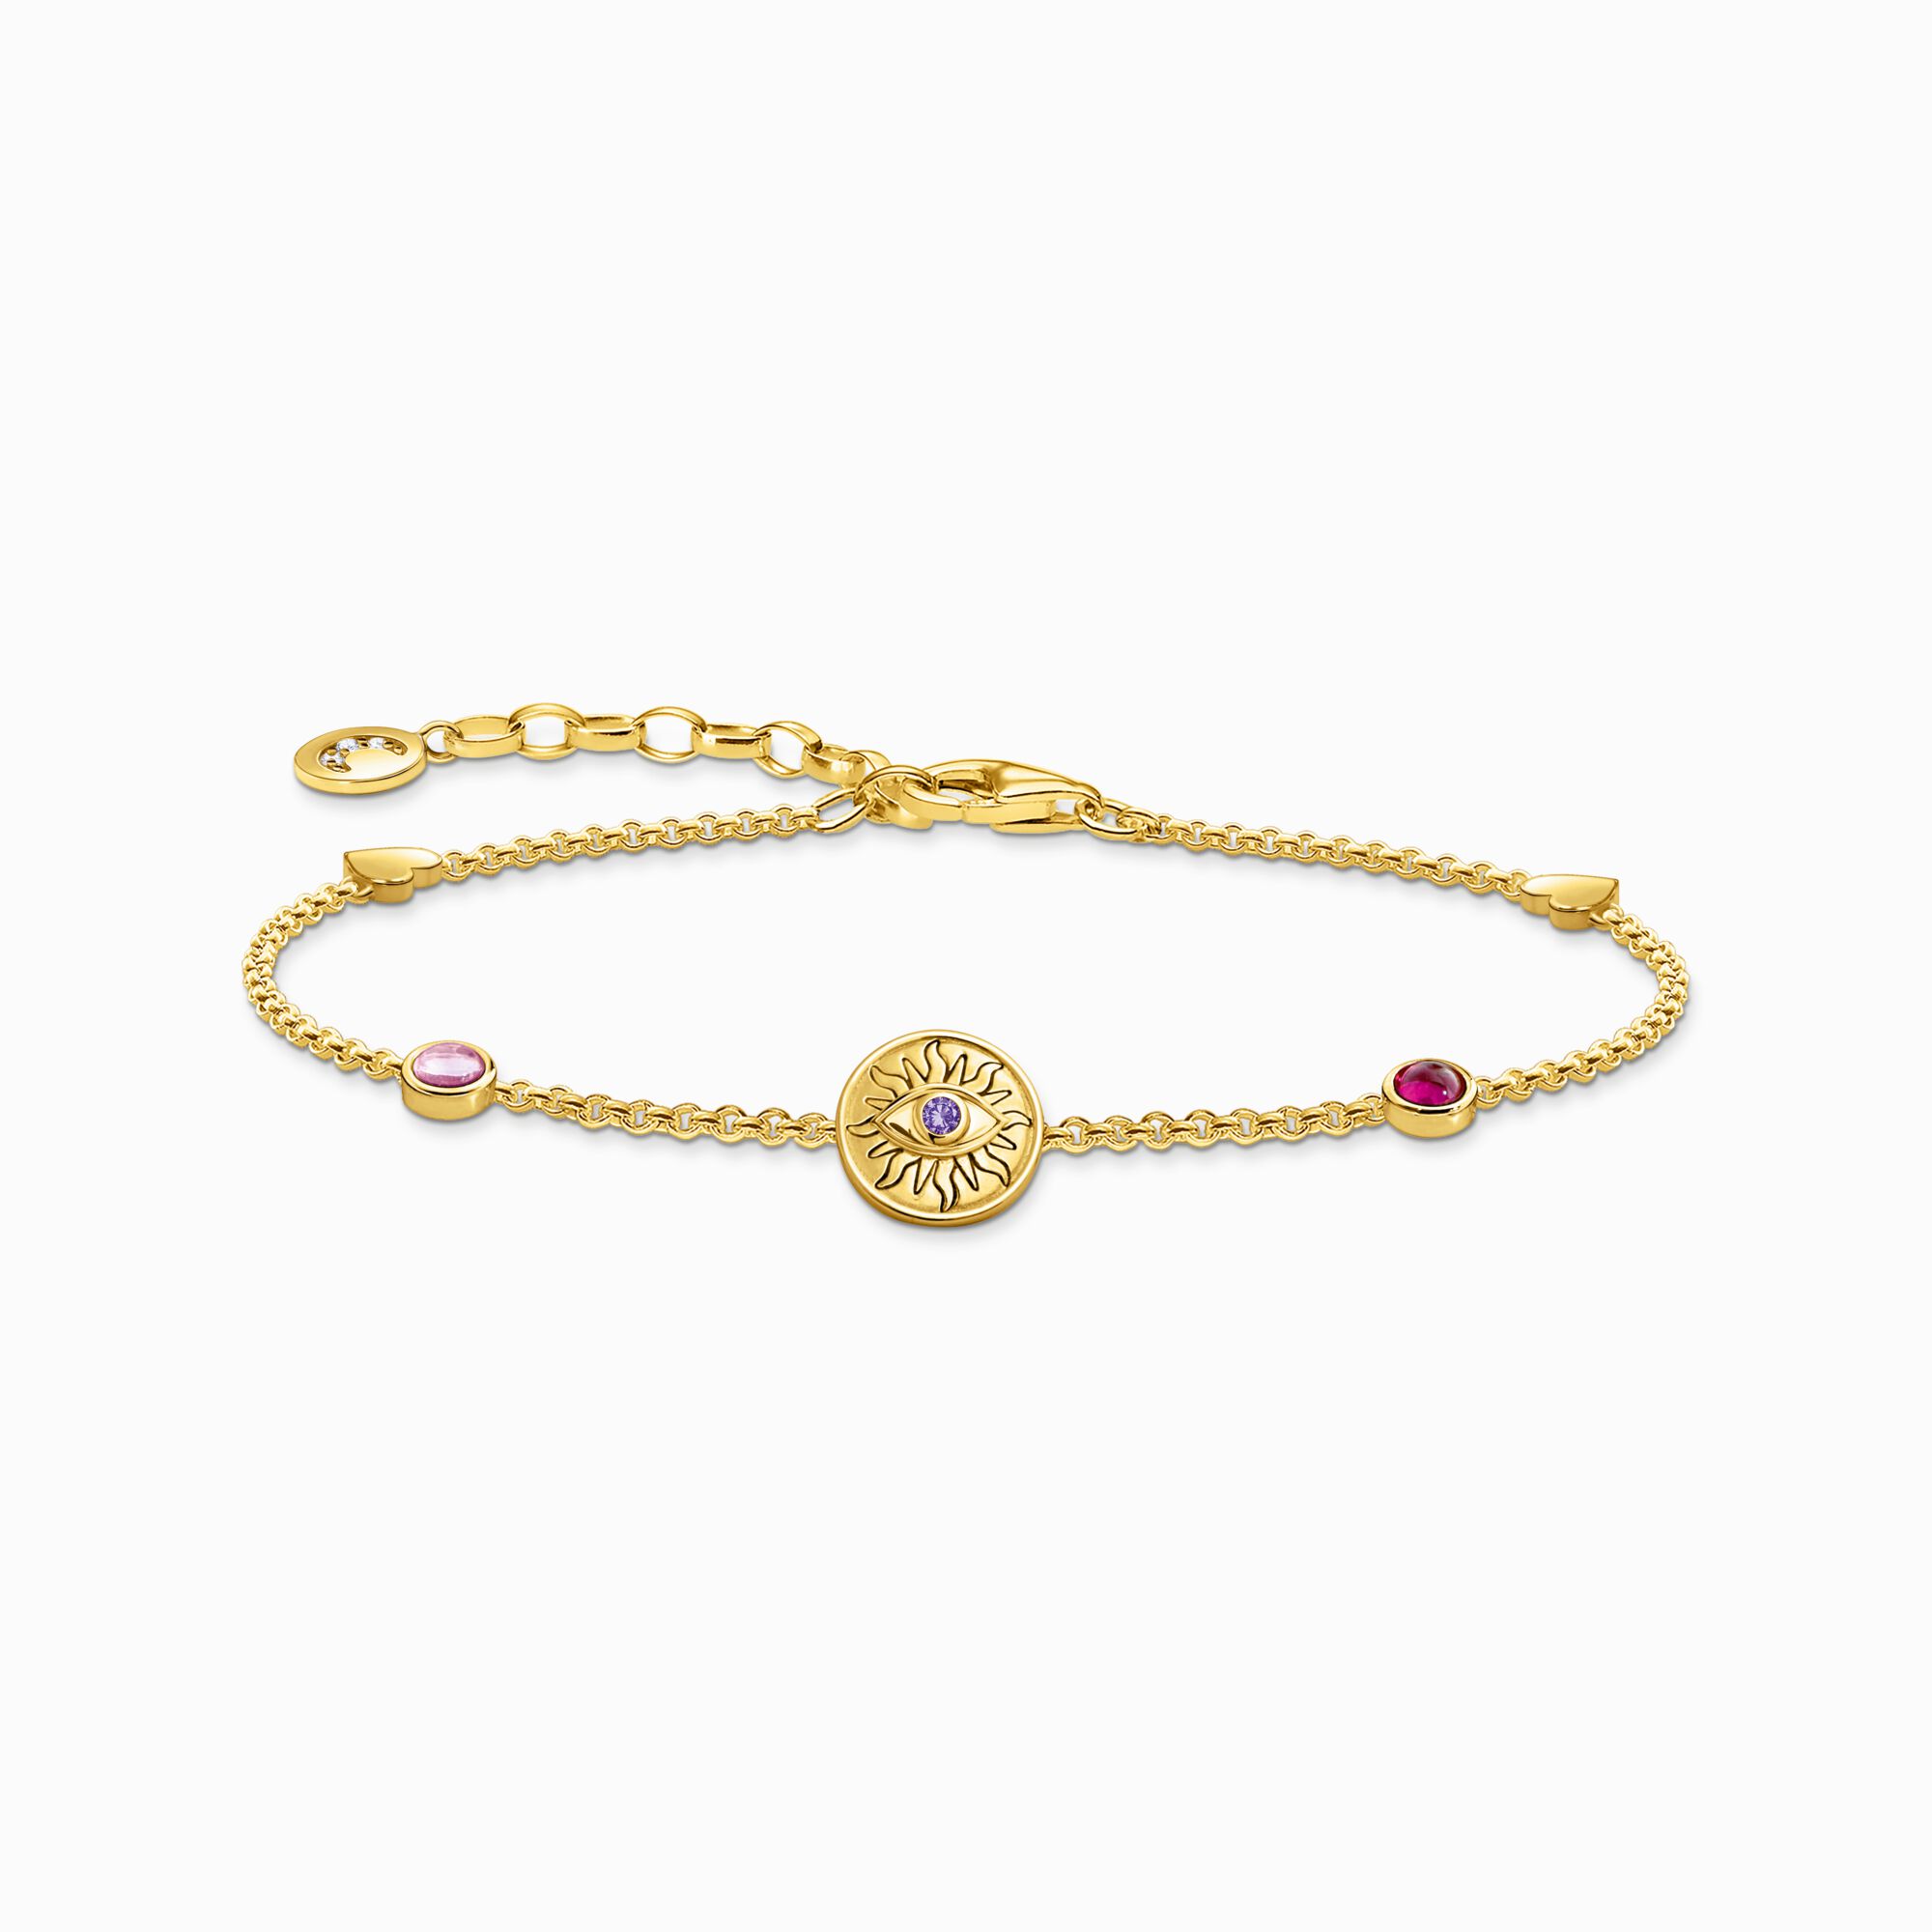 THOMAS SABO Yellow-gold plated bracelet with a sun coin and various stones A2132-995-7